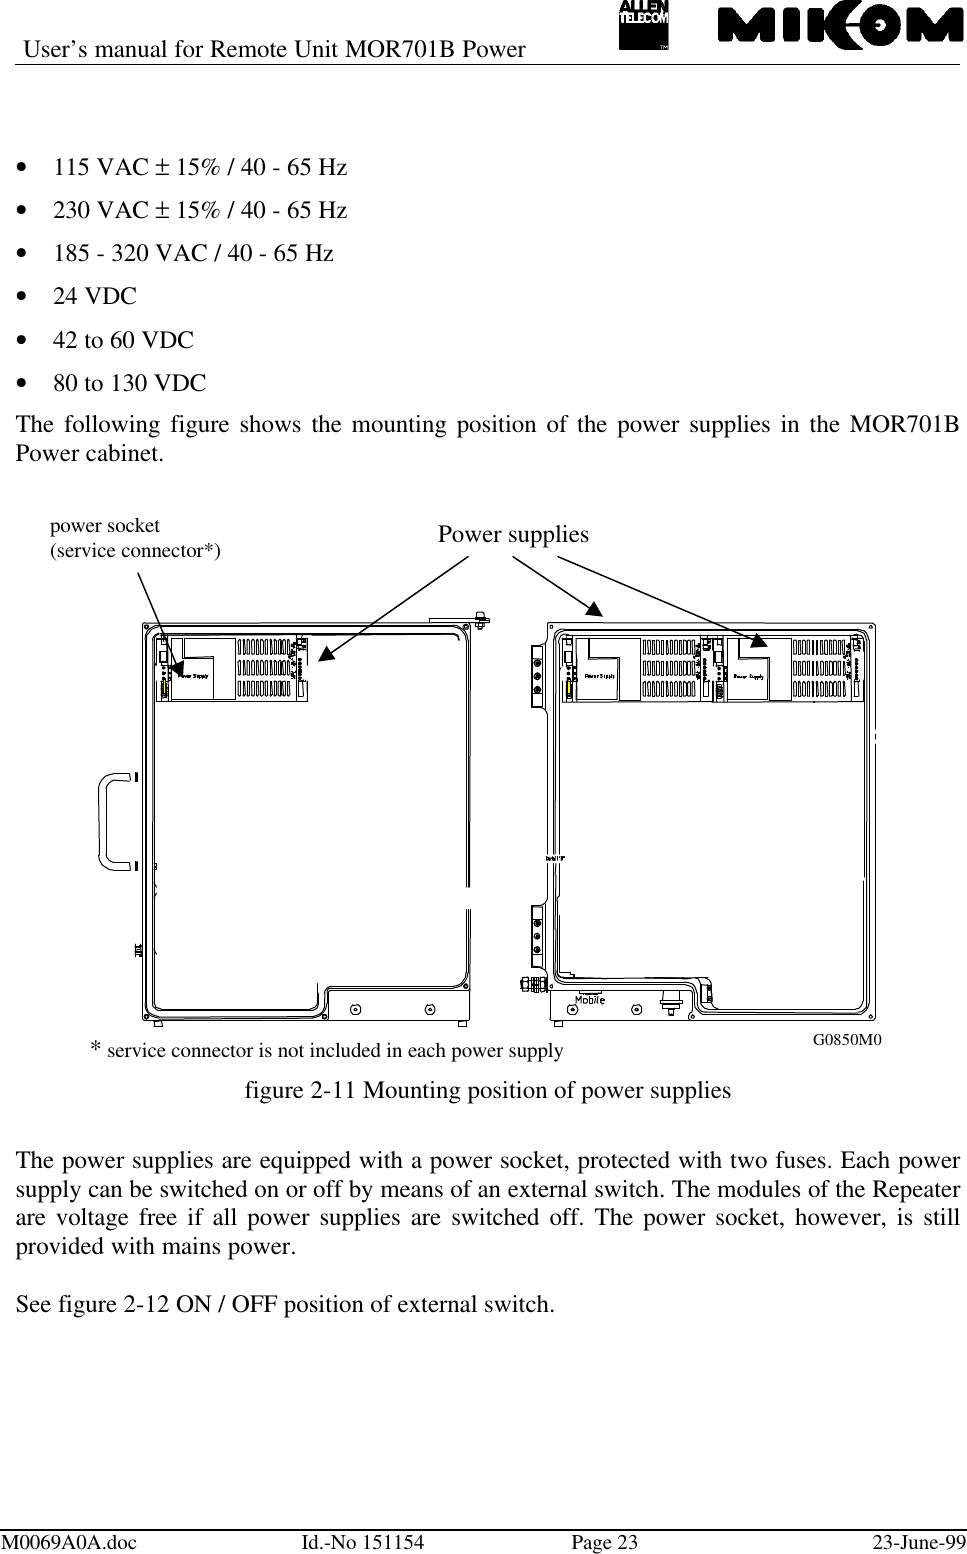 User’s manual for Remote Unit MOR701B PowerM0069A0A.doc Id.-No 151154 Page 23 23-June-99• 115 VAC ± 15% / 40 - 65 Hz• 230 VAC ± 15% / 40 - 65 Hz• 185 - 320 VAC / 40 - 65 Hz• 24 VDC• 42 to 60 VDC• 80 to 130 VDCThe following figure shows the mounting position of the power supplies in the MOR701BPower cabinet.* service connector is not included in each power supplyfigure 2-11 Mounting position of power suppliesThe power supplies are equipped with a power socket, protected with two fuses. Each powersupply can be switched on or off by means of an external switch. The modules of the Repeaterare voltage free if all power supplies are switched off. The power socket, however, is stillprovided with mains power.See figure 2-12 ON / OFF position of external switch.Power suppliespower socket(service connector*)G0850M0